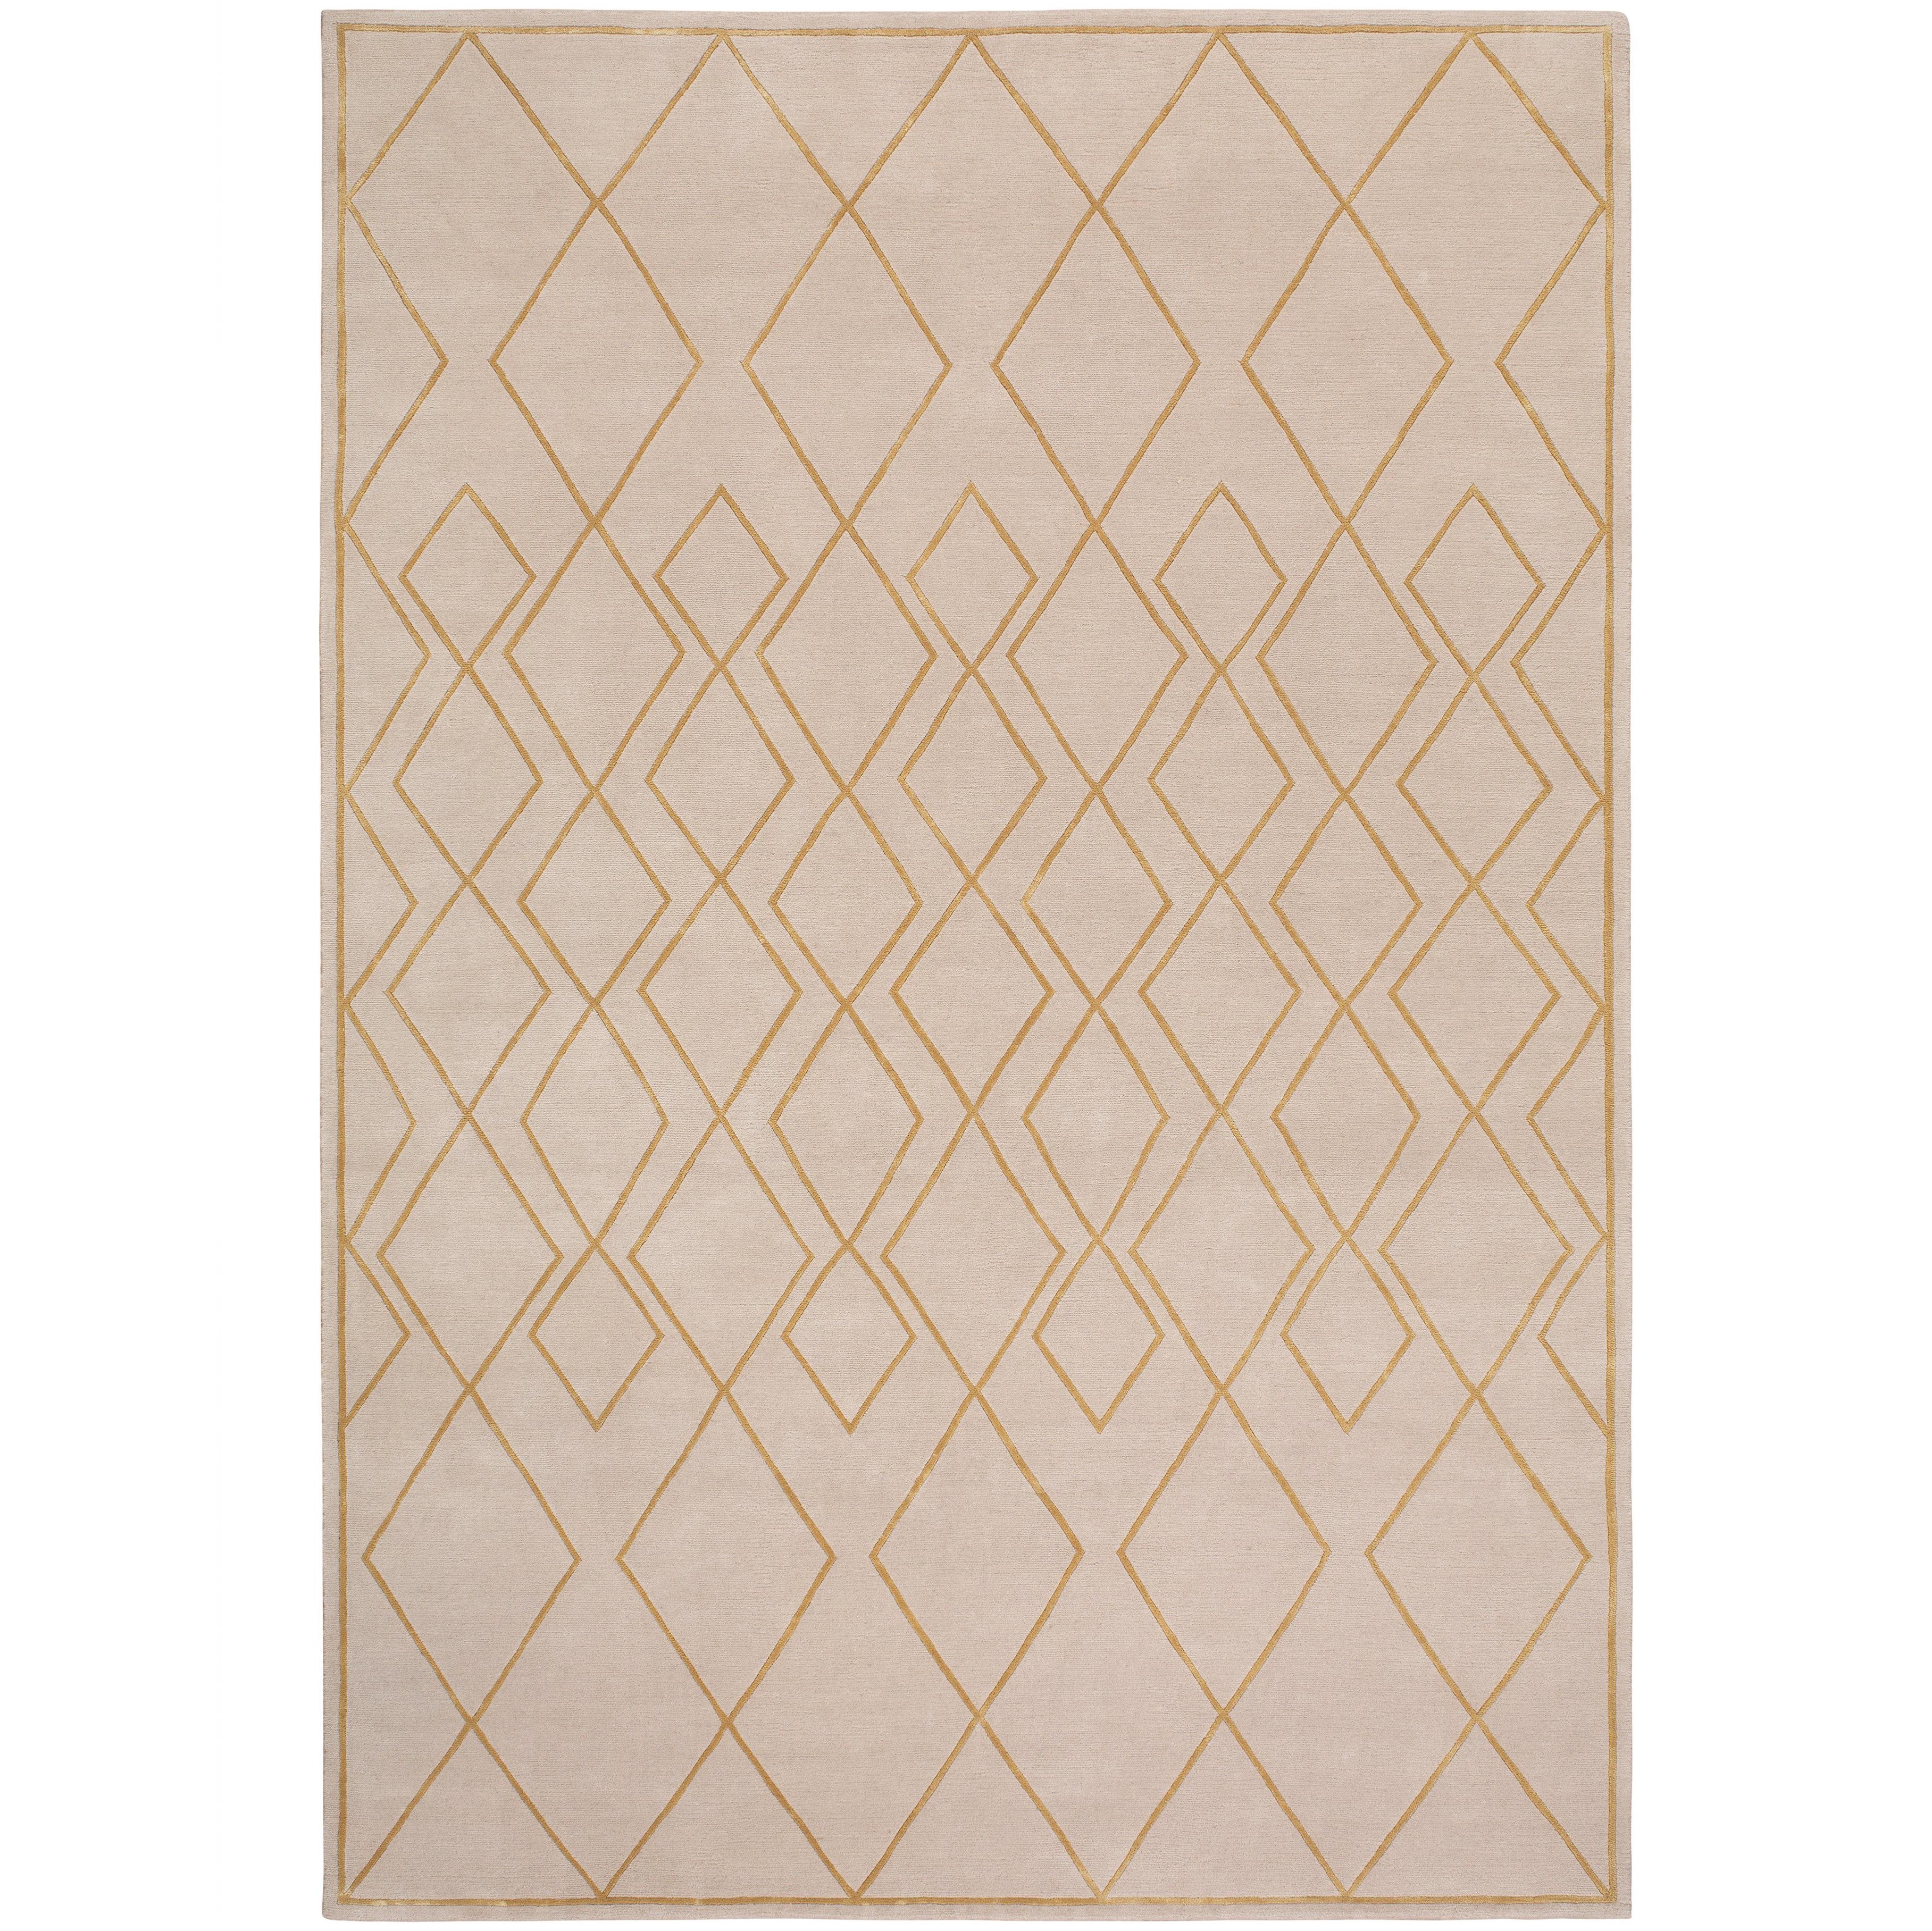 Deco Diamond Light Hand-Knotted 10x8 Rug in Wool and Silk by Tim Gosling